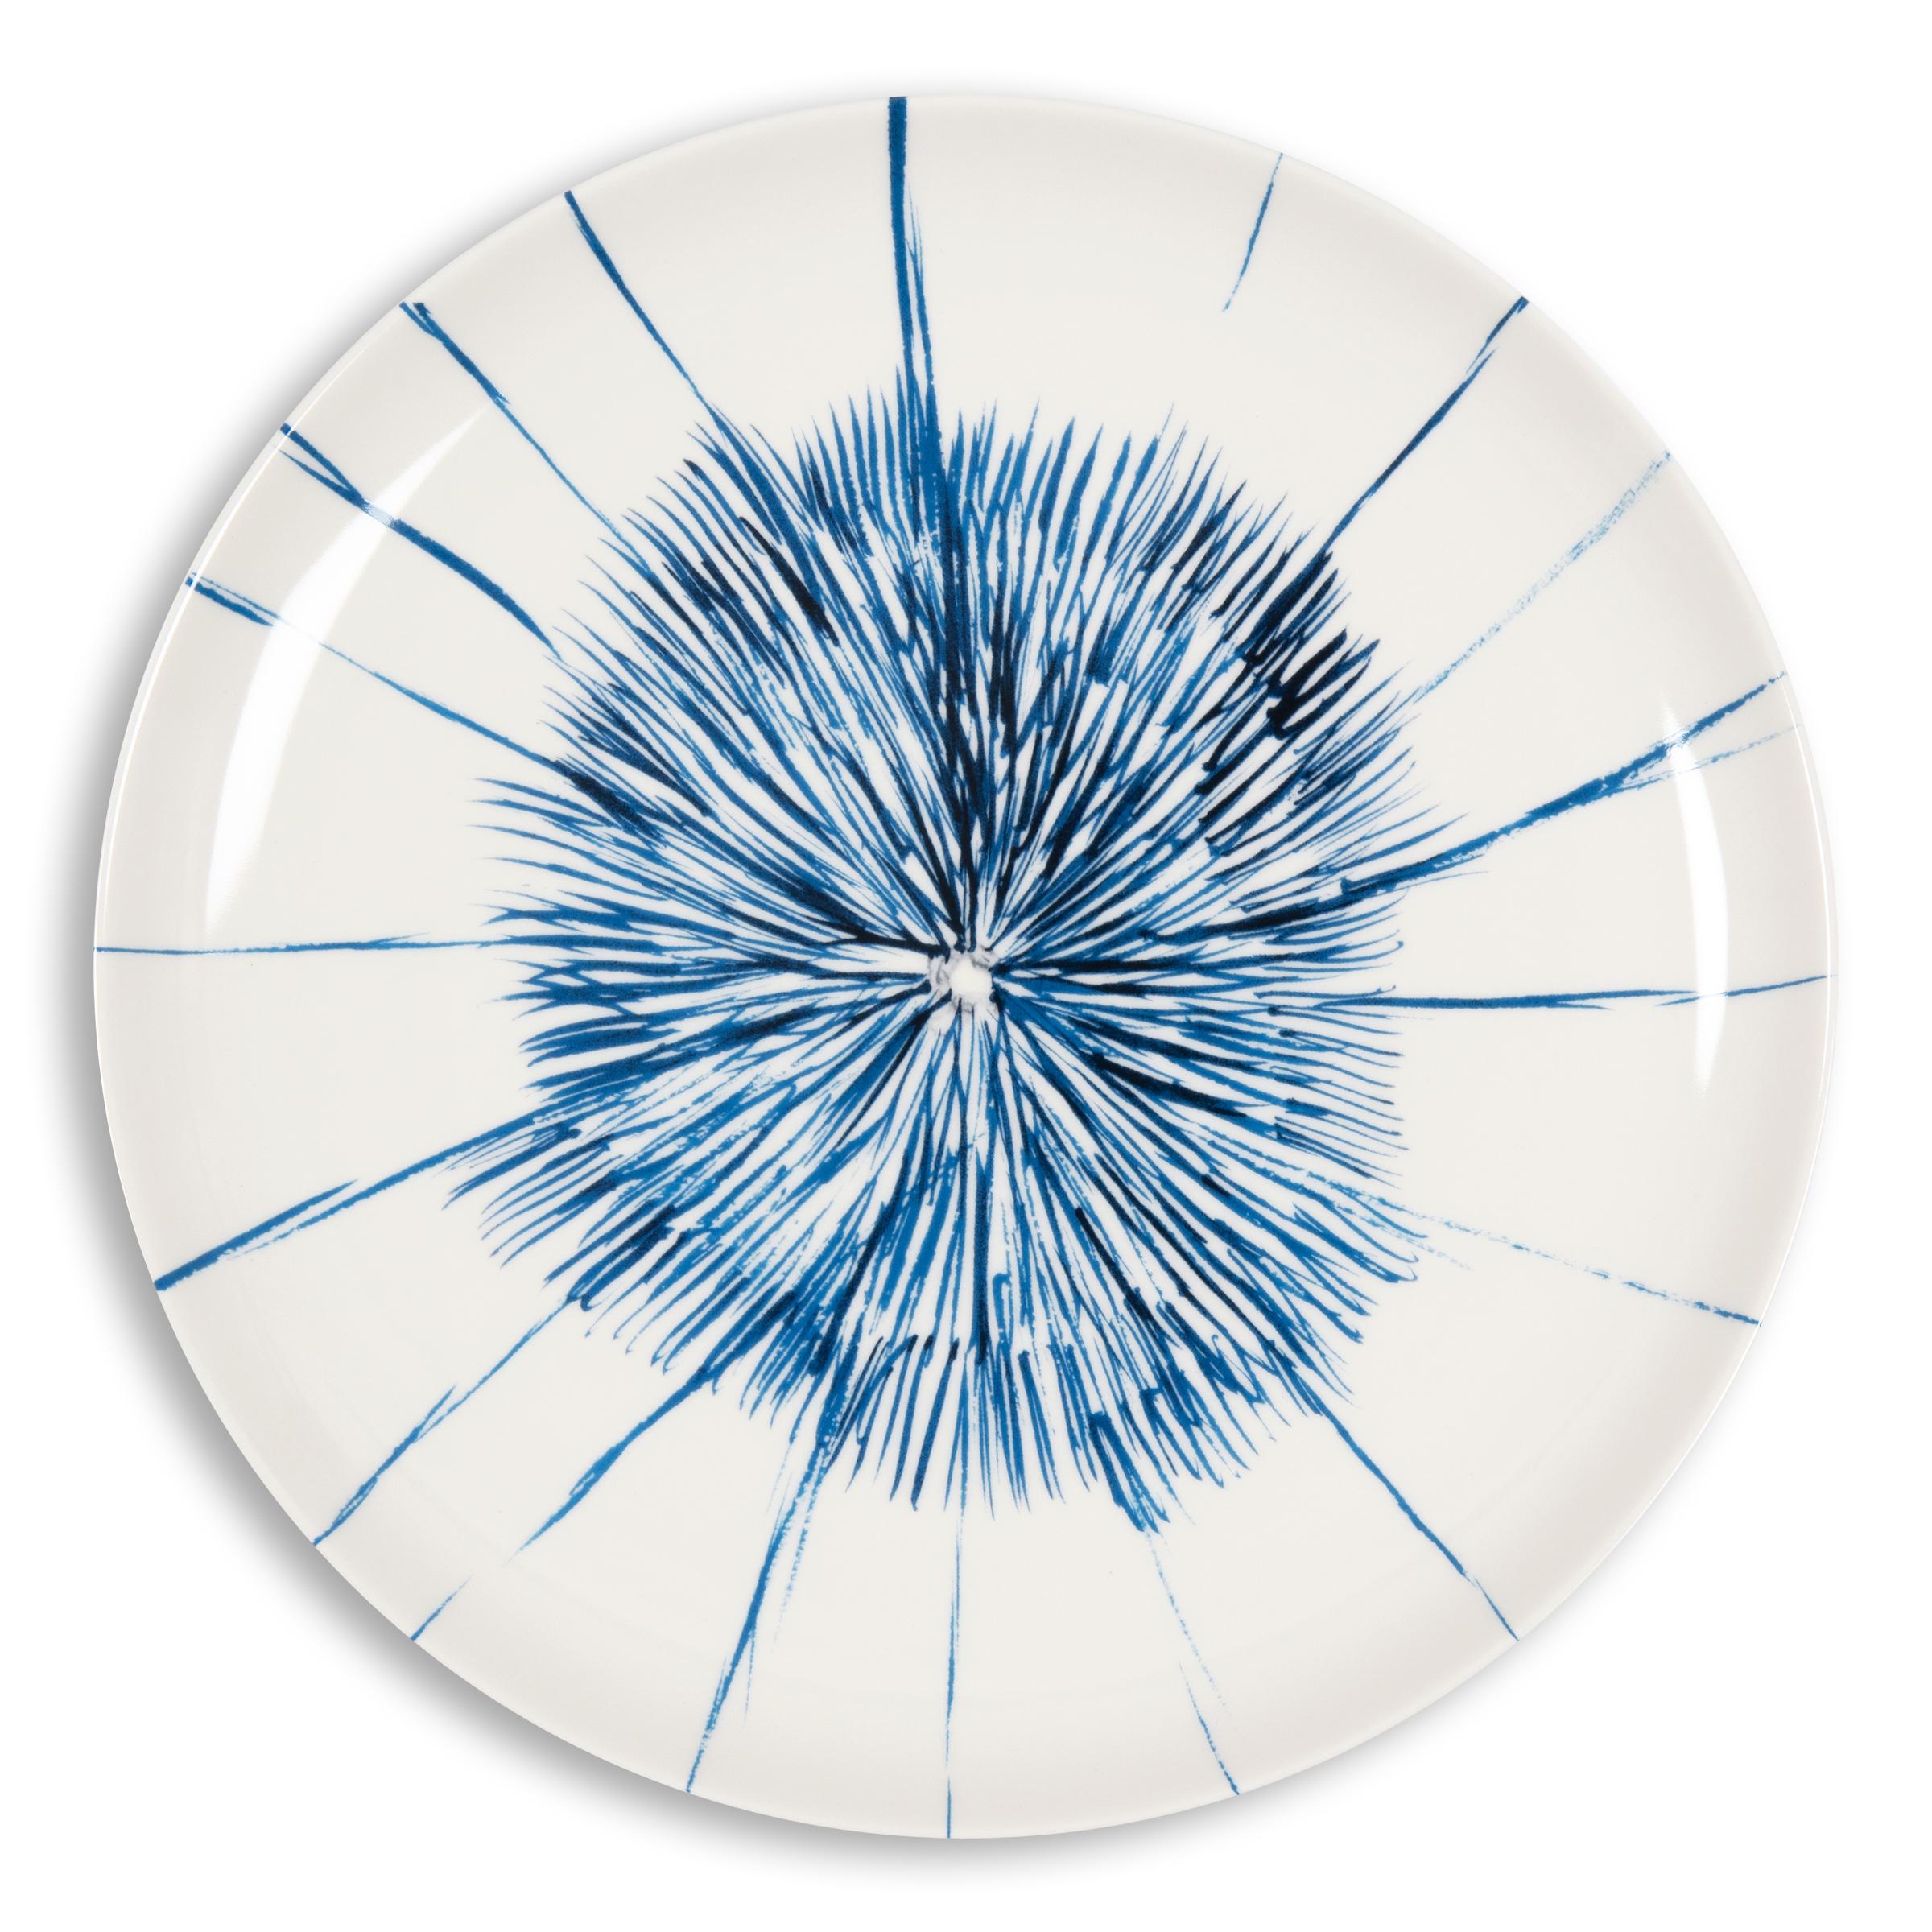 Louise Bourgeois (French-American, 1911-2010)
Je t'aime, 2005/2023
Medium: Fine bone china
Dimensions: 26.7 diameter (10.5 in)
Edition of 250: Not signed, not numbered (Printed signature and edition details on verso)
Condition: Mint (in original